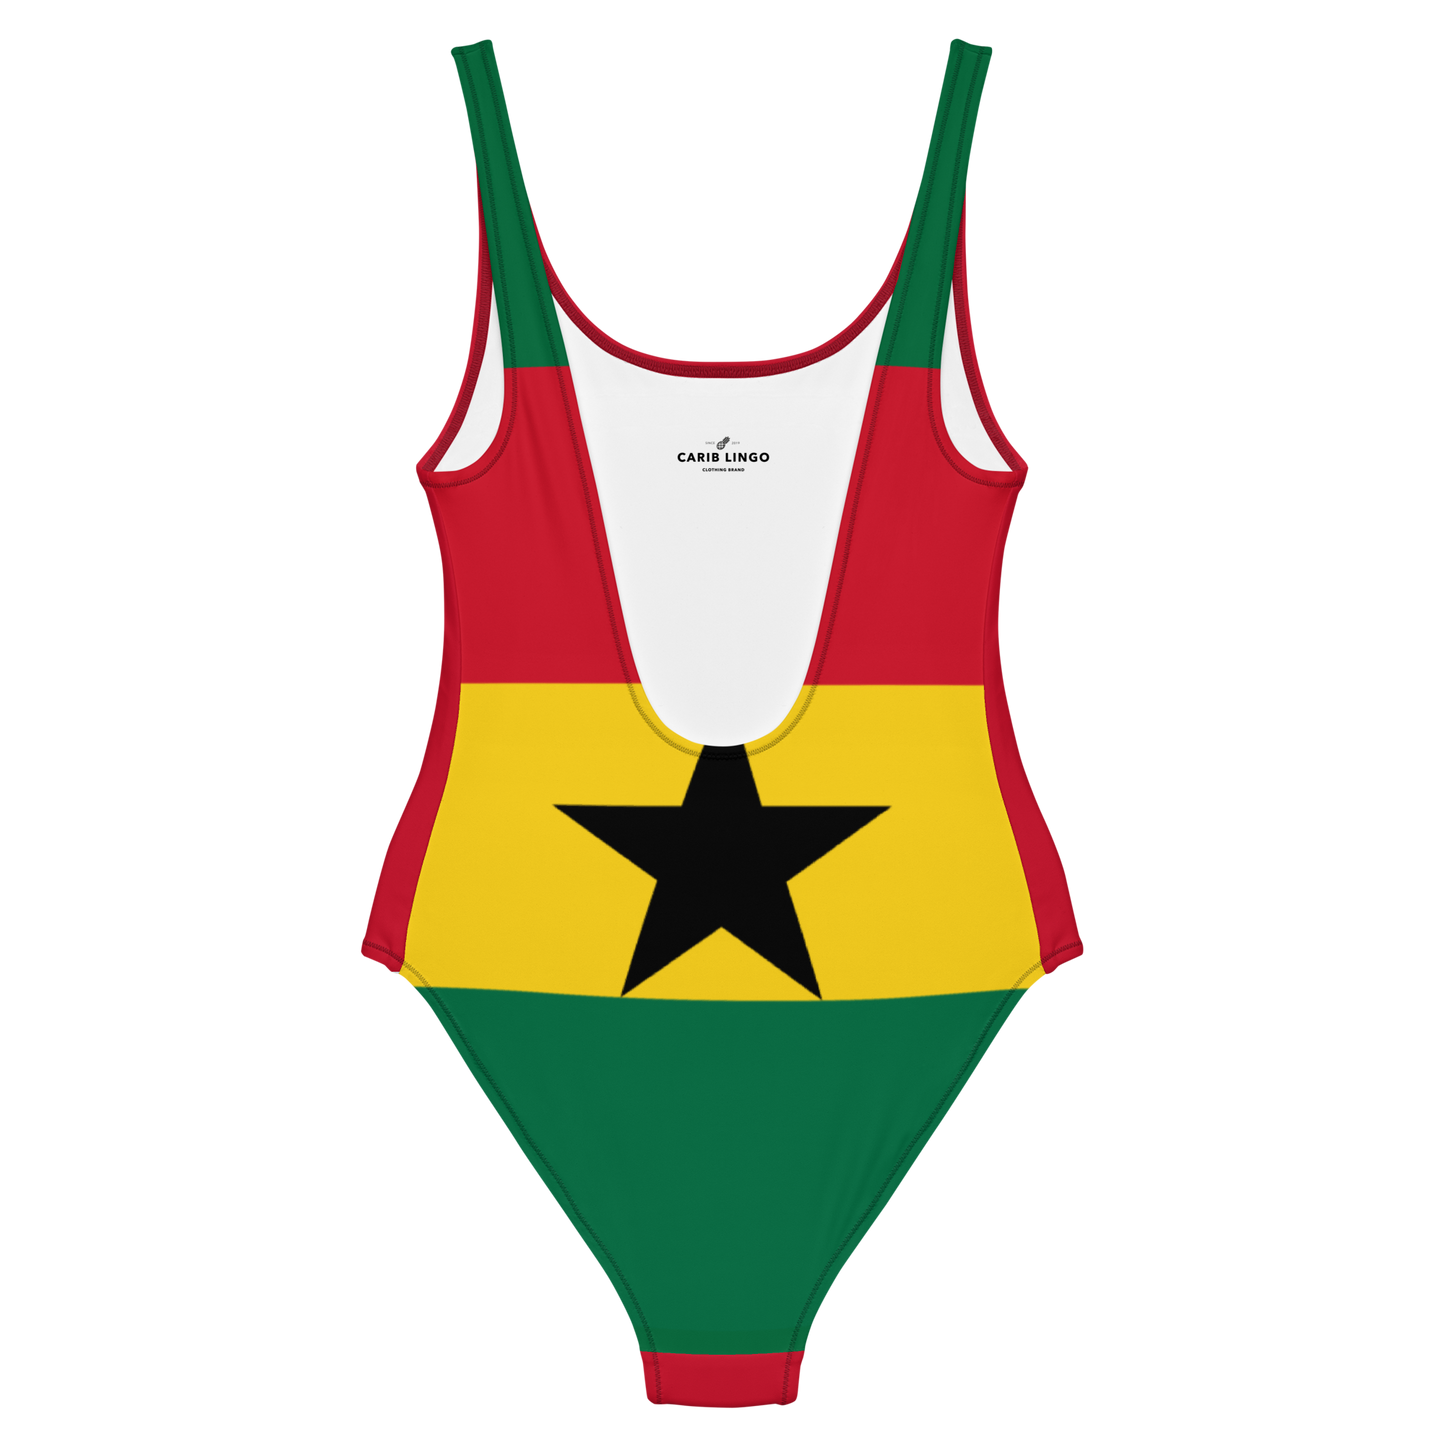 I Am Rooting: Ghana One-Piece Swimsuit